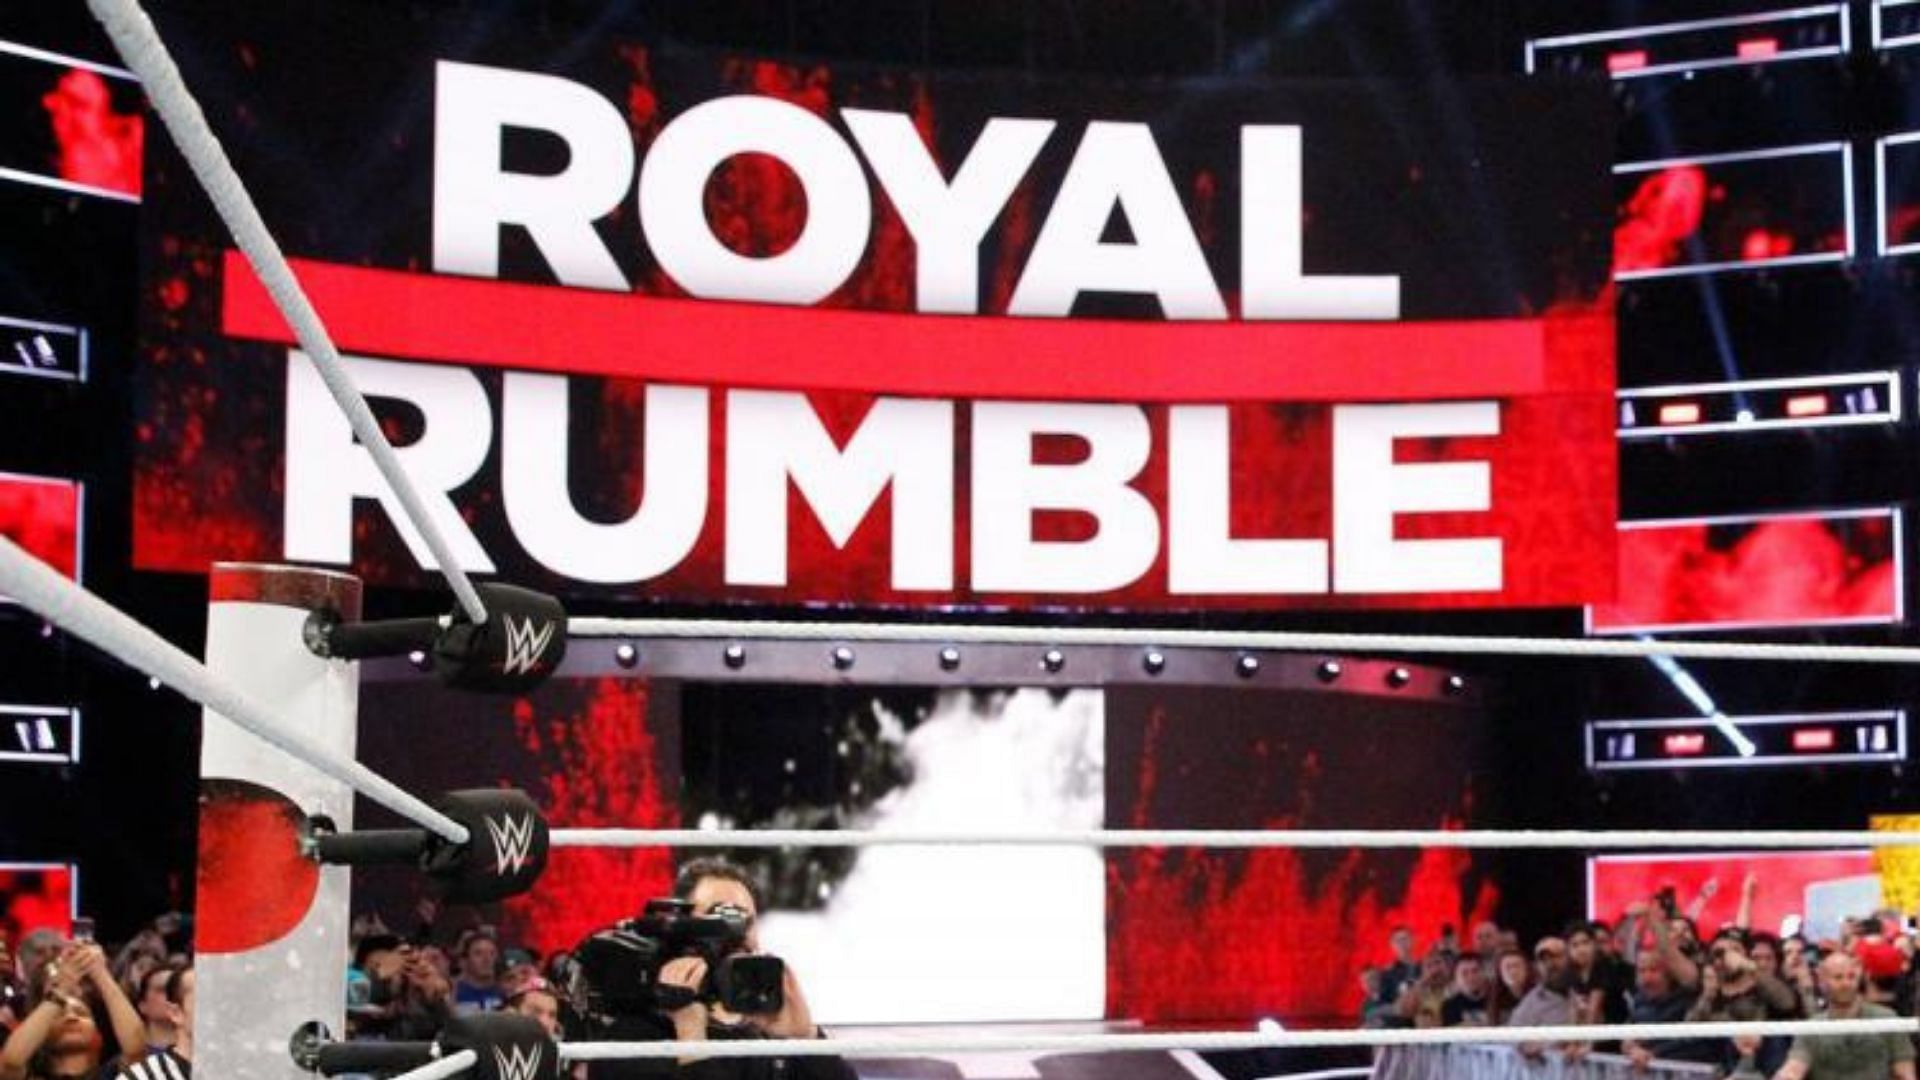 The Royal Rumble is due to take place in St. Louis, Missouri on January 29